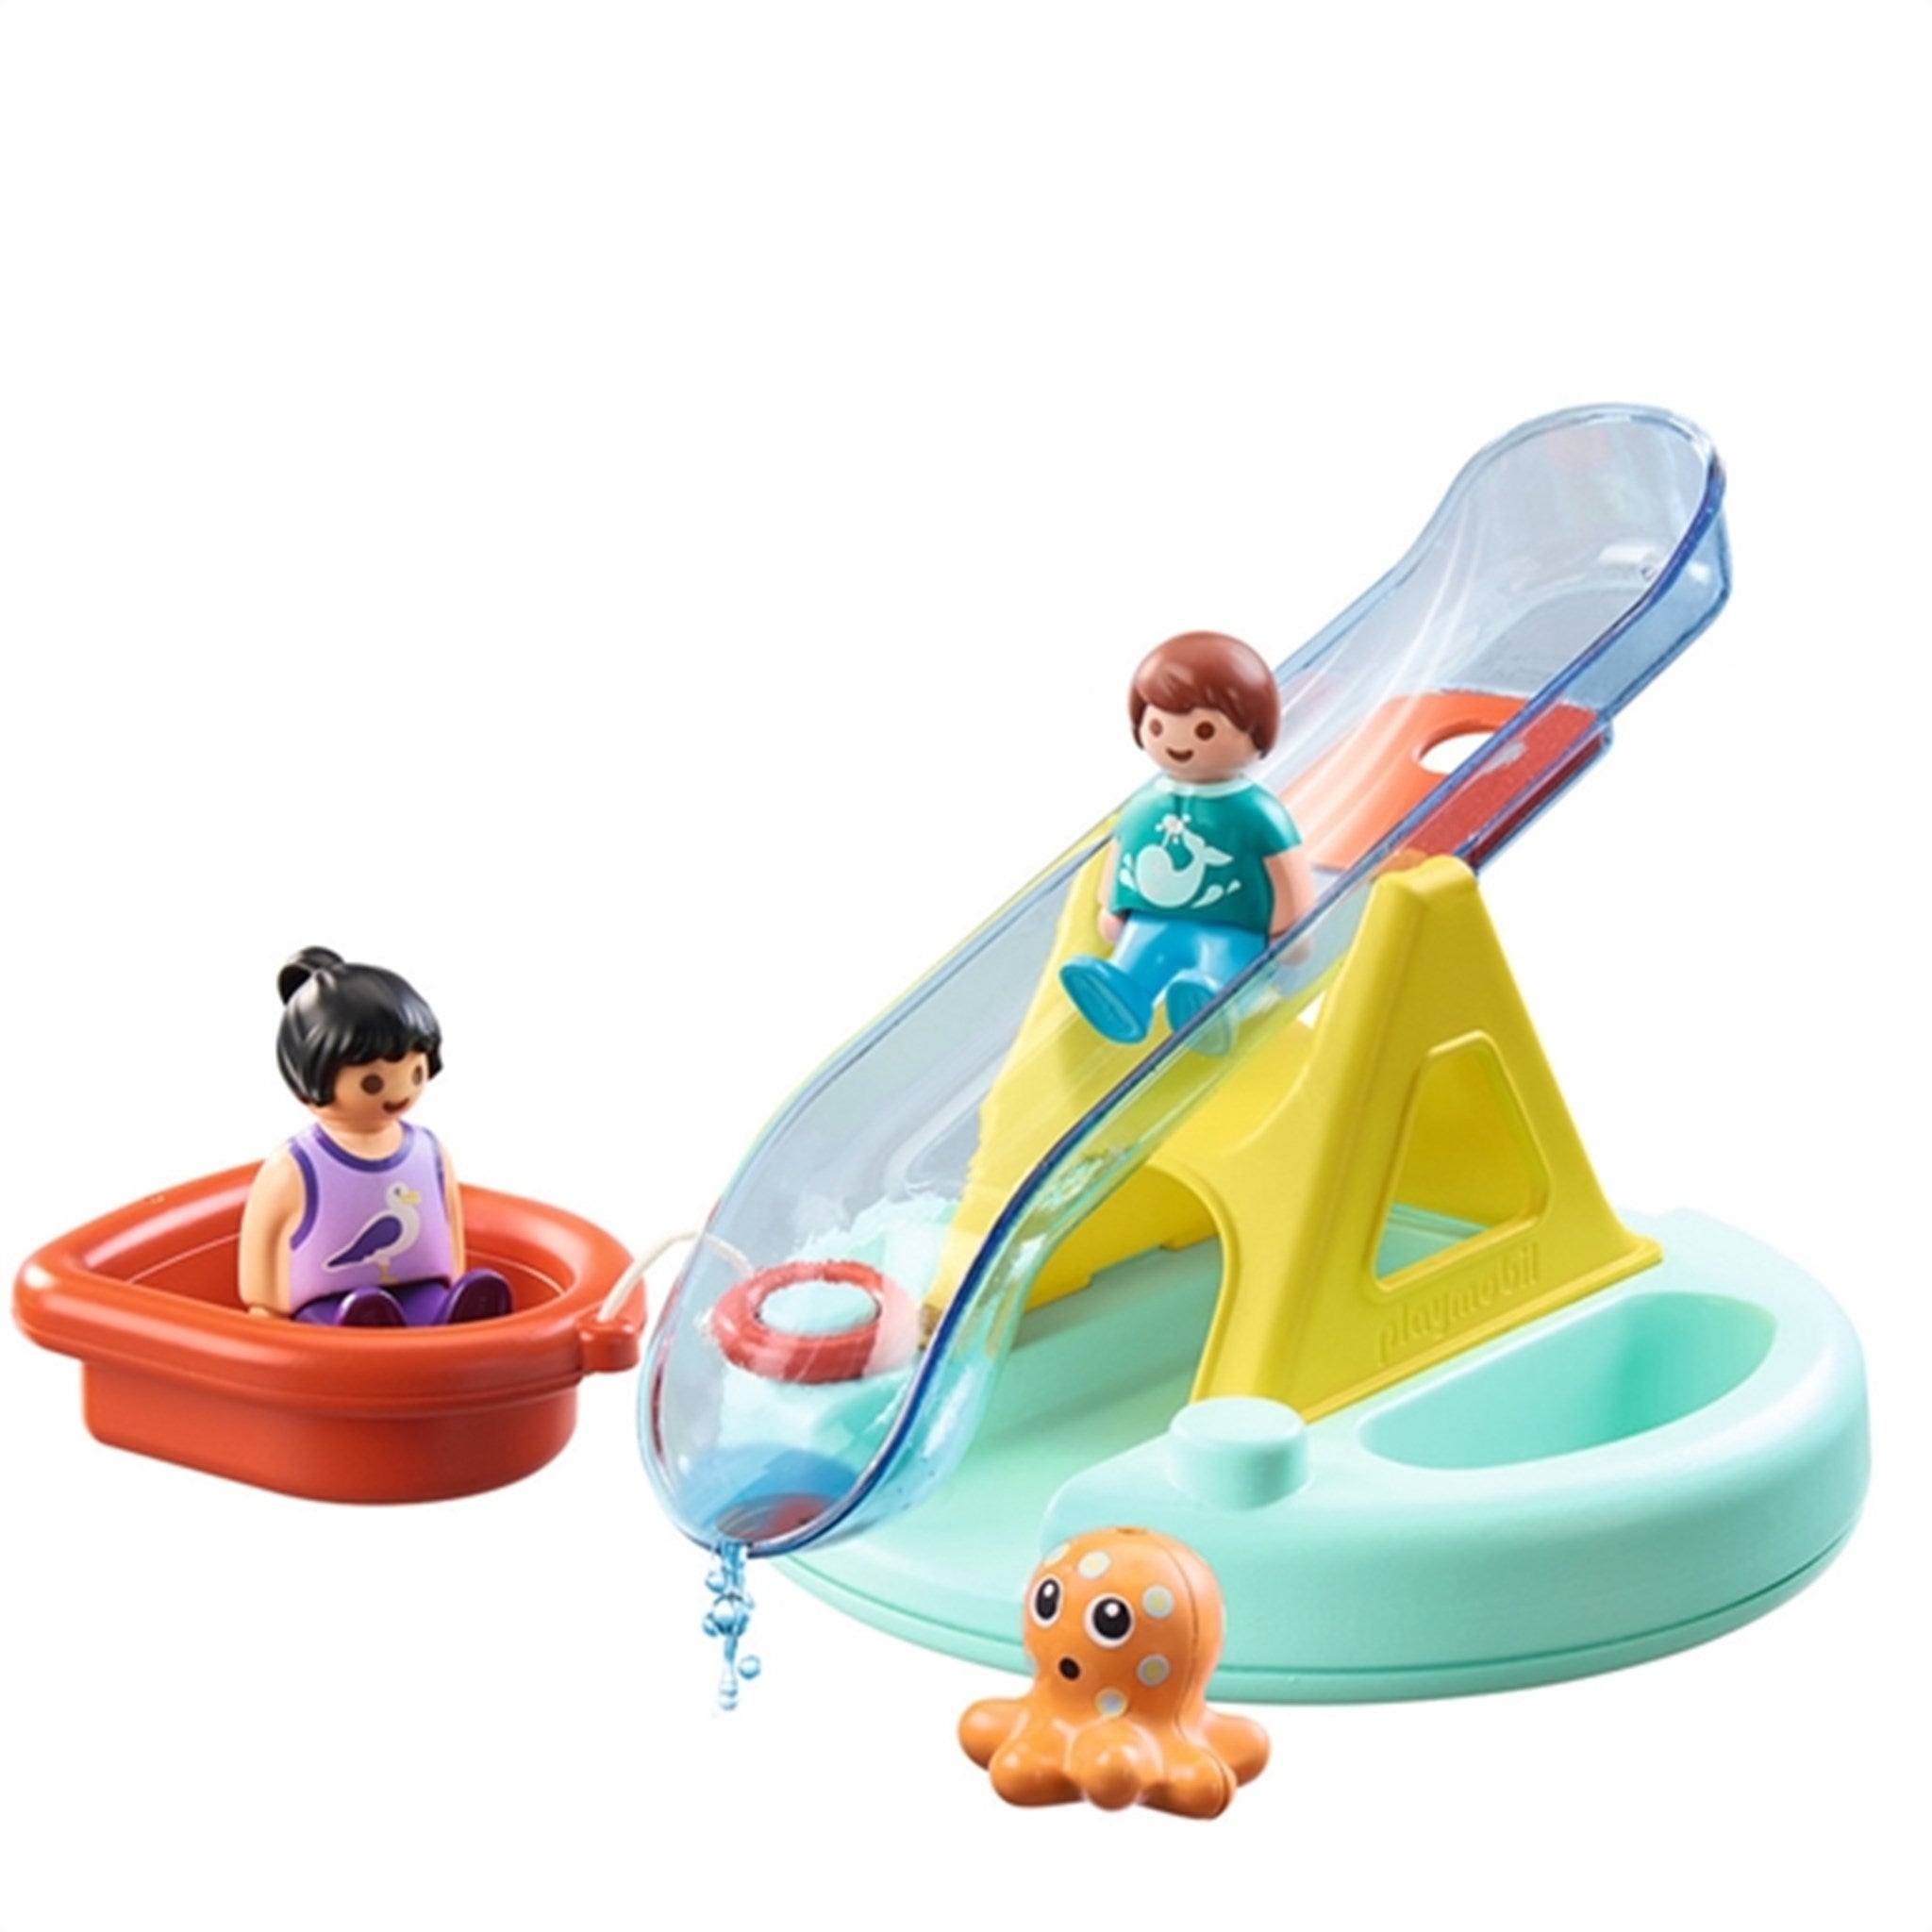 Playmobil® 1.2.3 Aqua - Water Seesaw with Boat 4